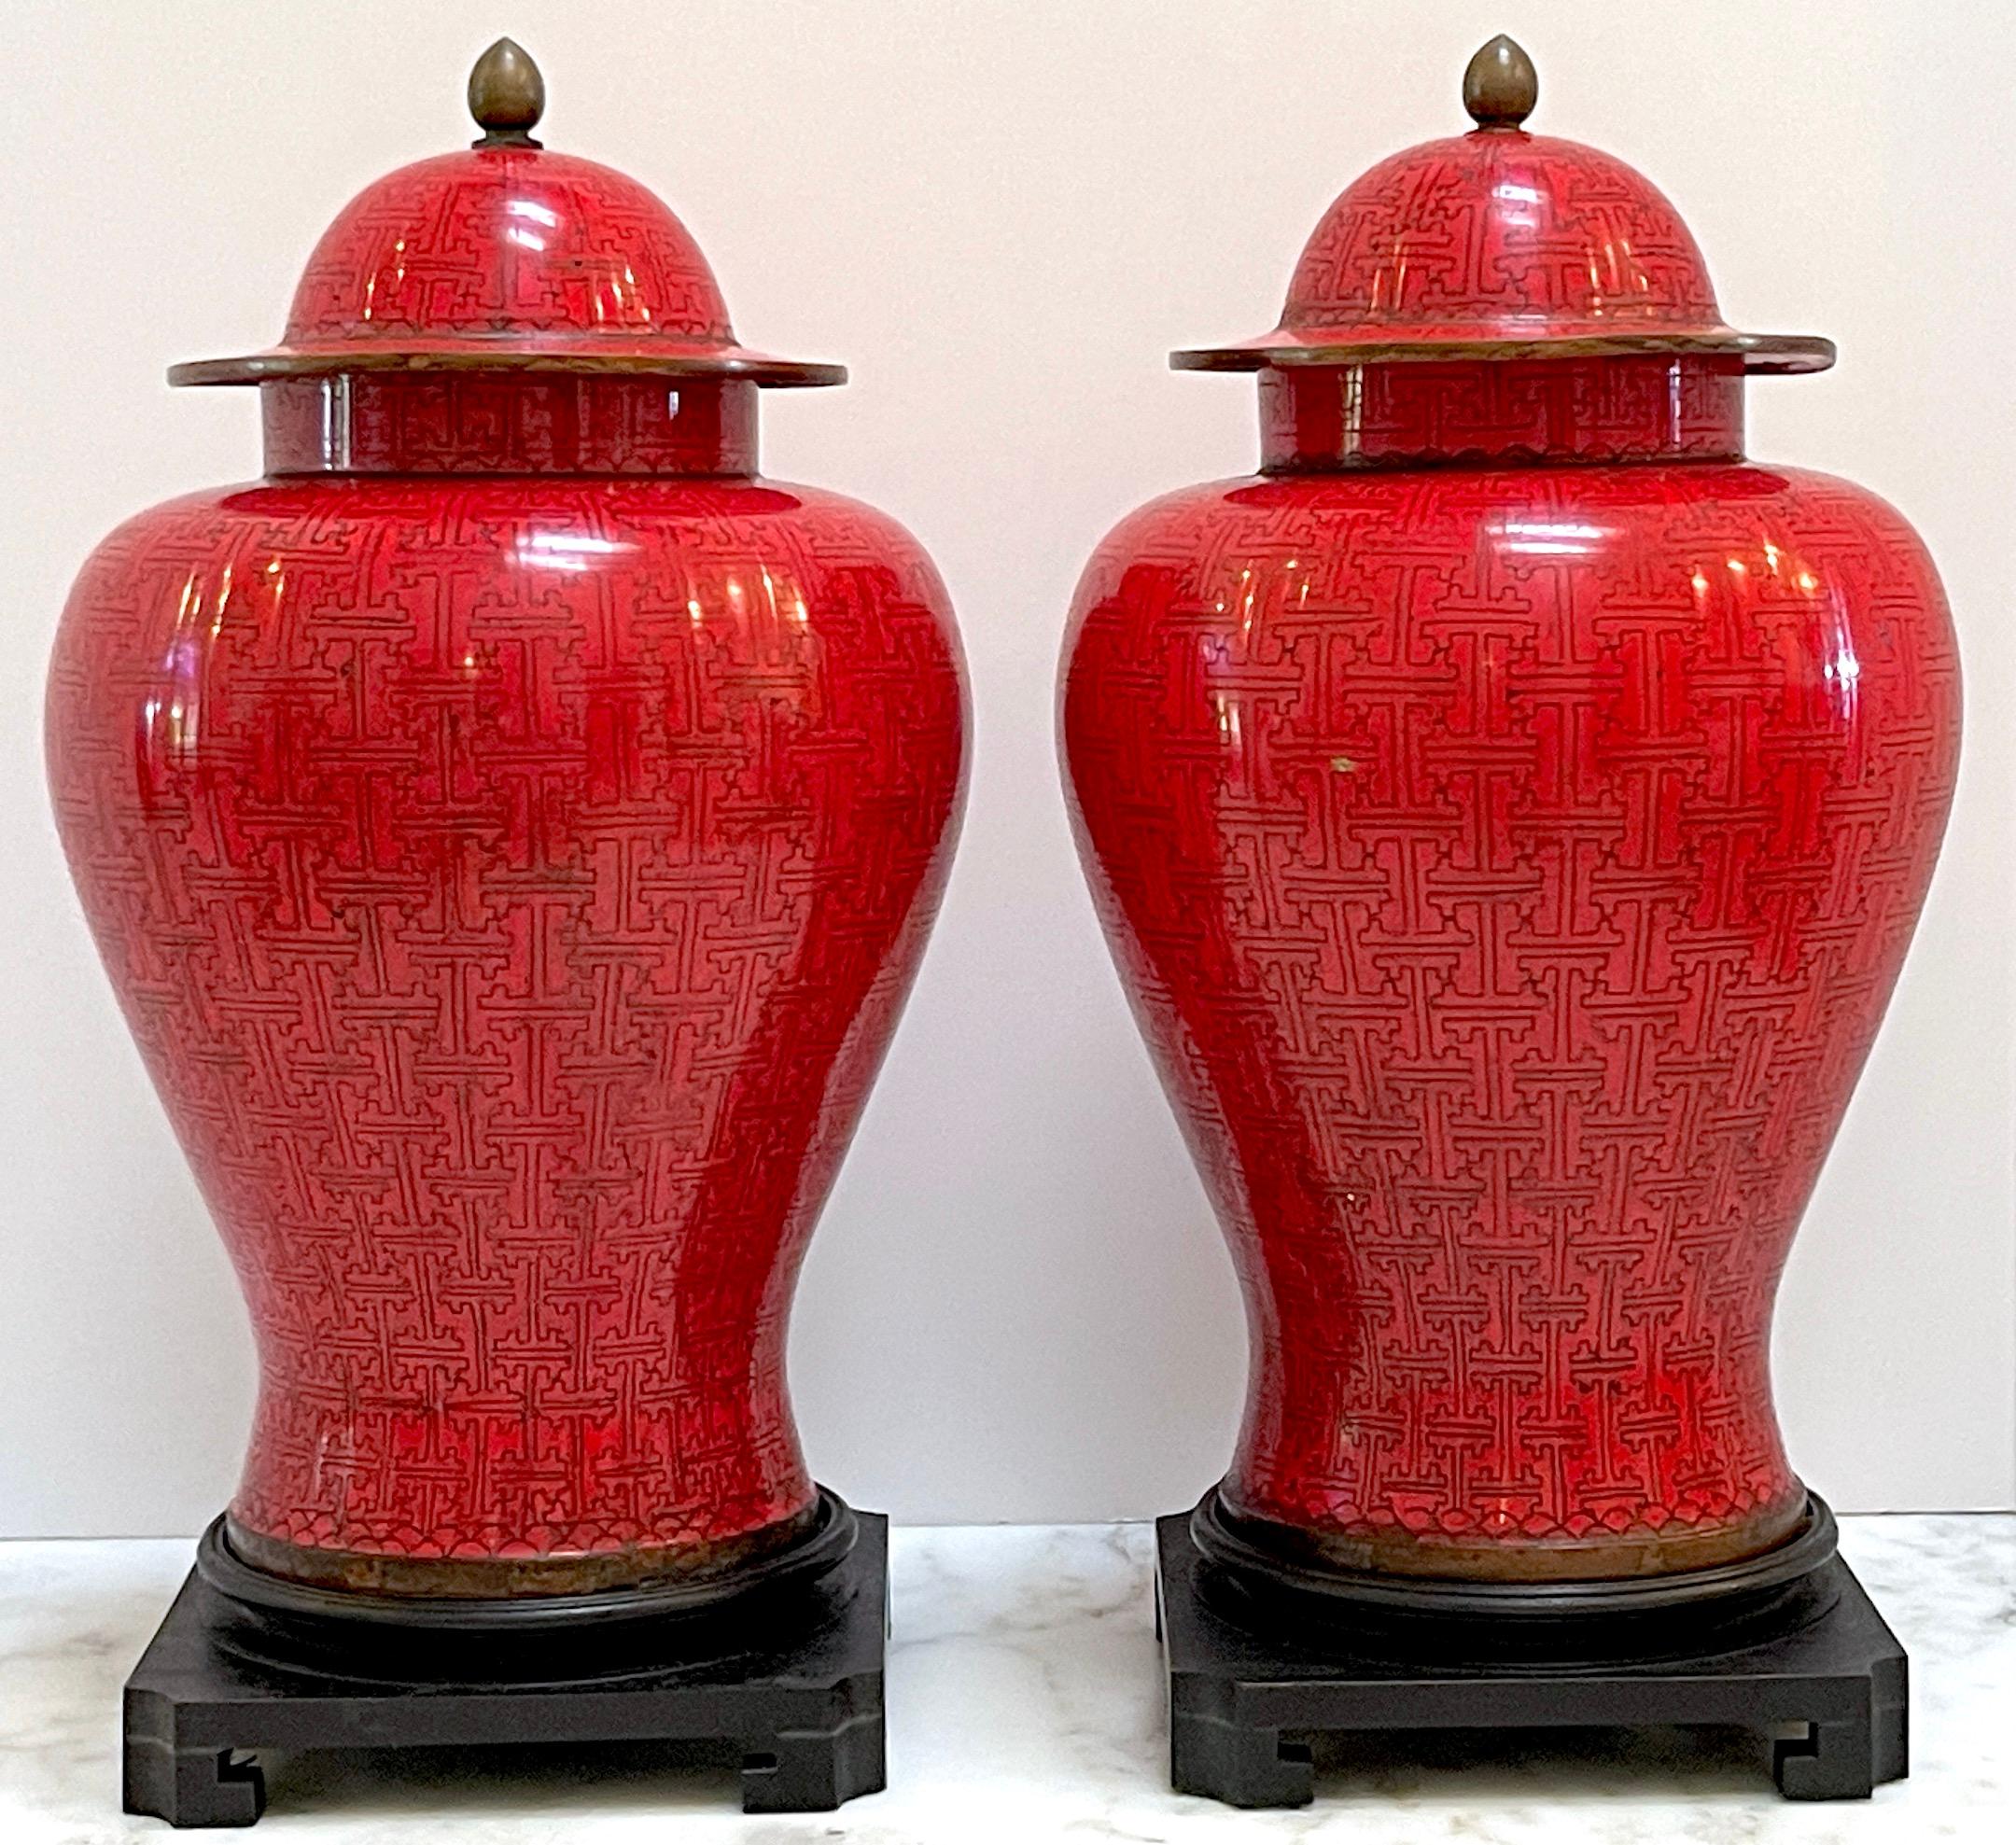 Pair of Chinese Modernist Red Cloisonné Ginger Jars and Stands, Circa 1960s  
China, 20th Century

A stunning pair of Chinese Modernist red cloisonné ginger jars and stands, crafted in China during the 1960s. These large jars exemplify the perfect